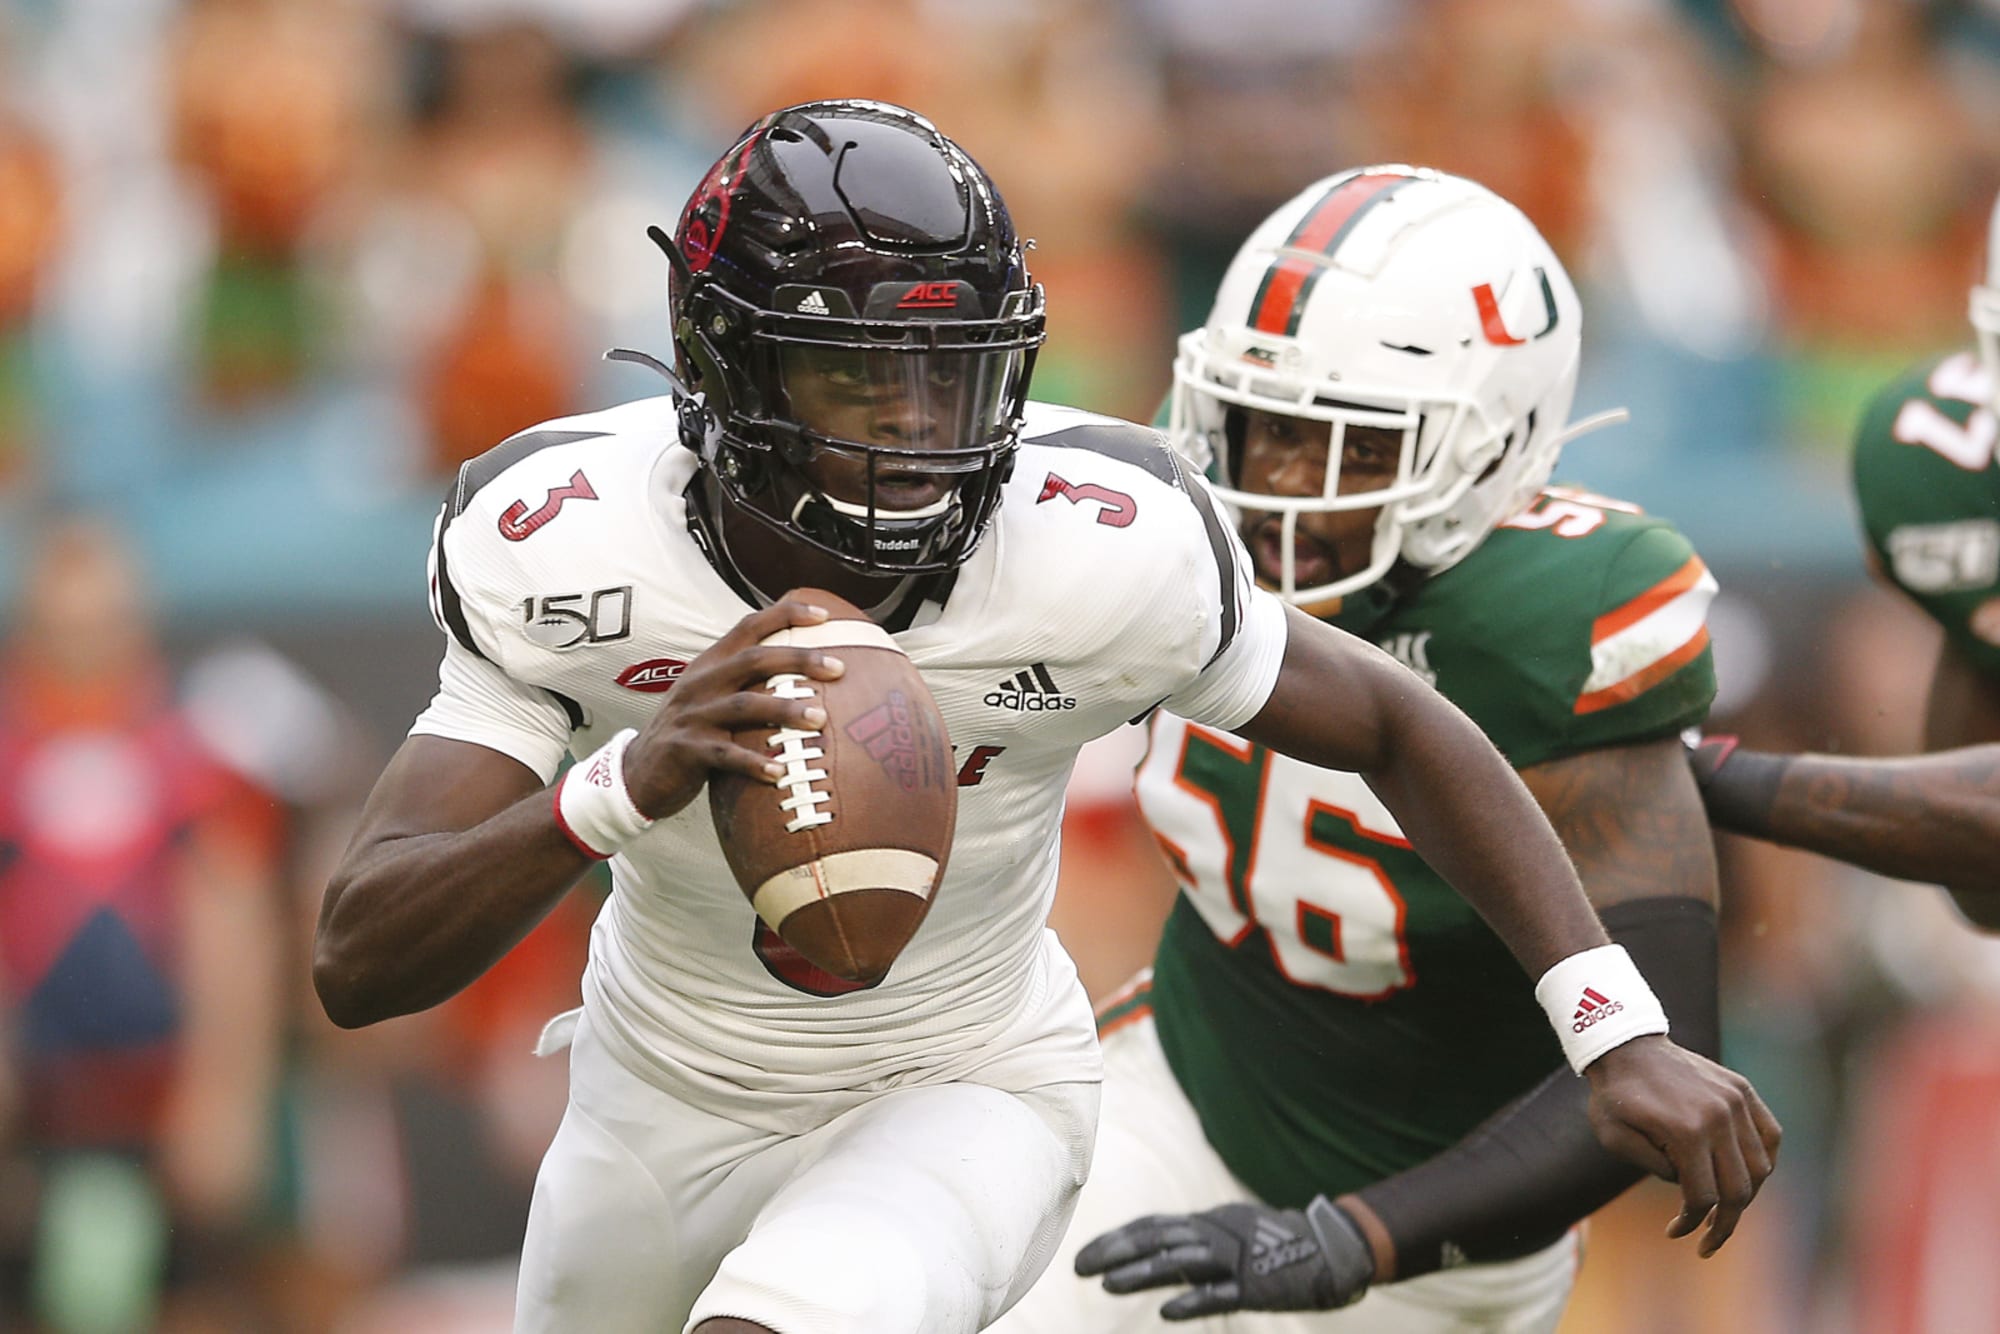 Miami vs Louisville College Football live stream for Week 3